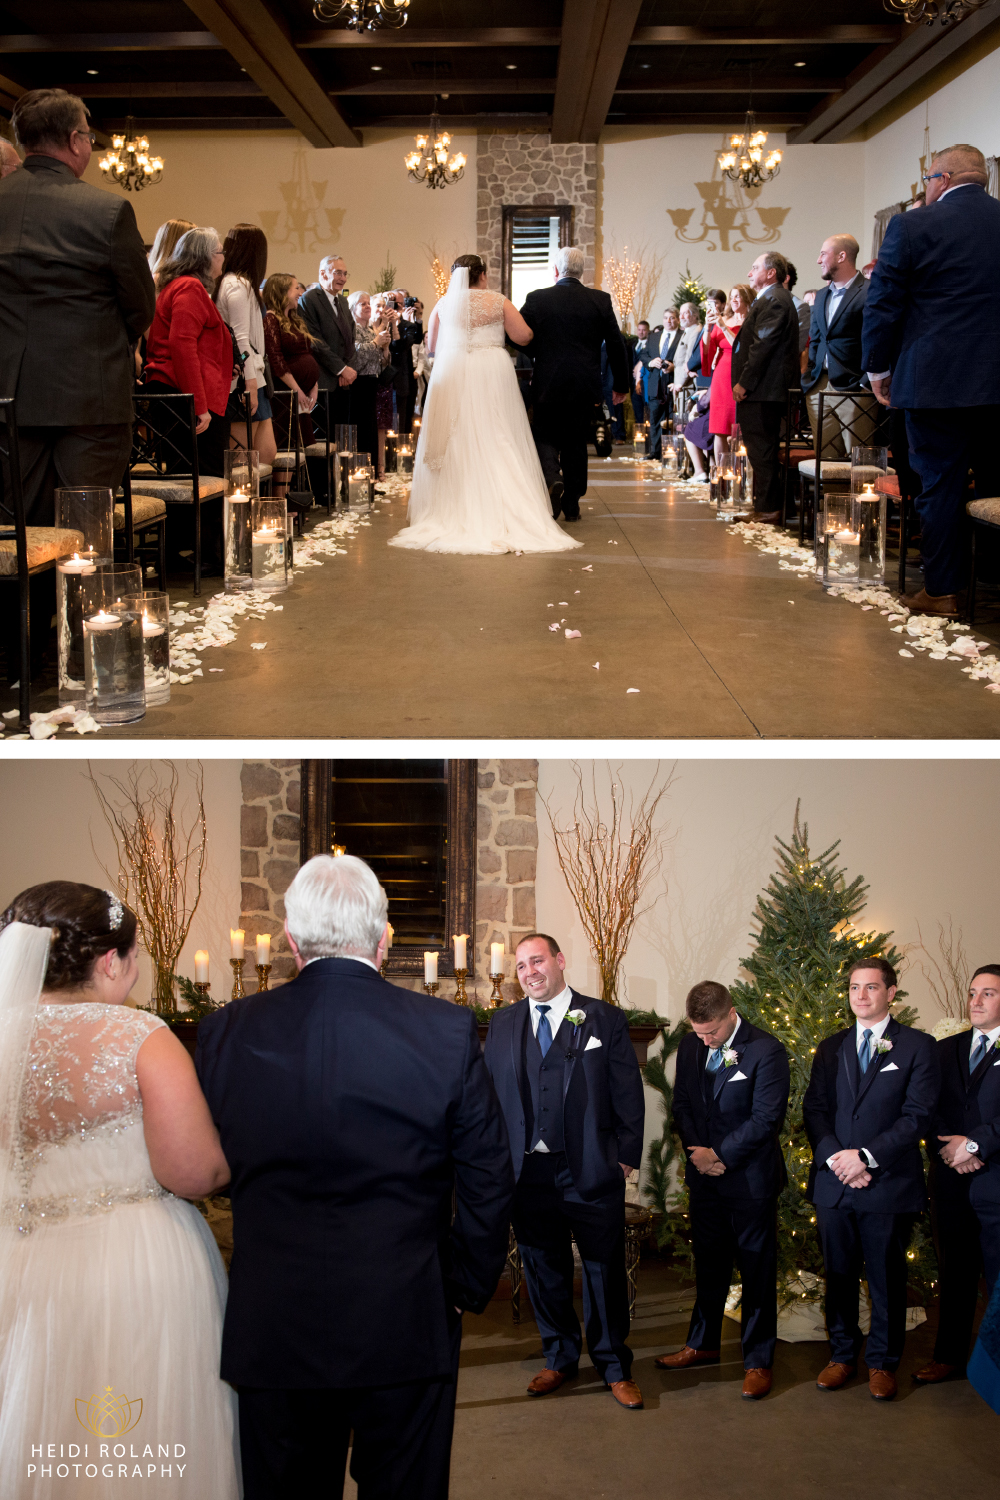 Bride walking down the aisle with her dad at The Inn at Leola Village Wedding